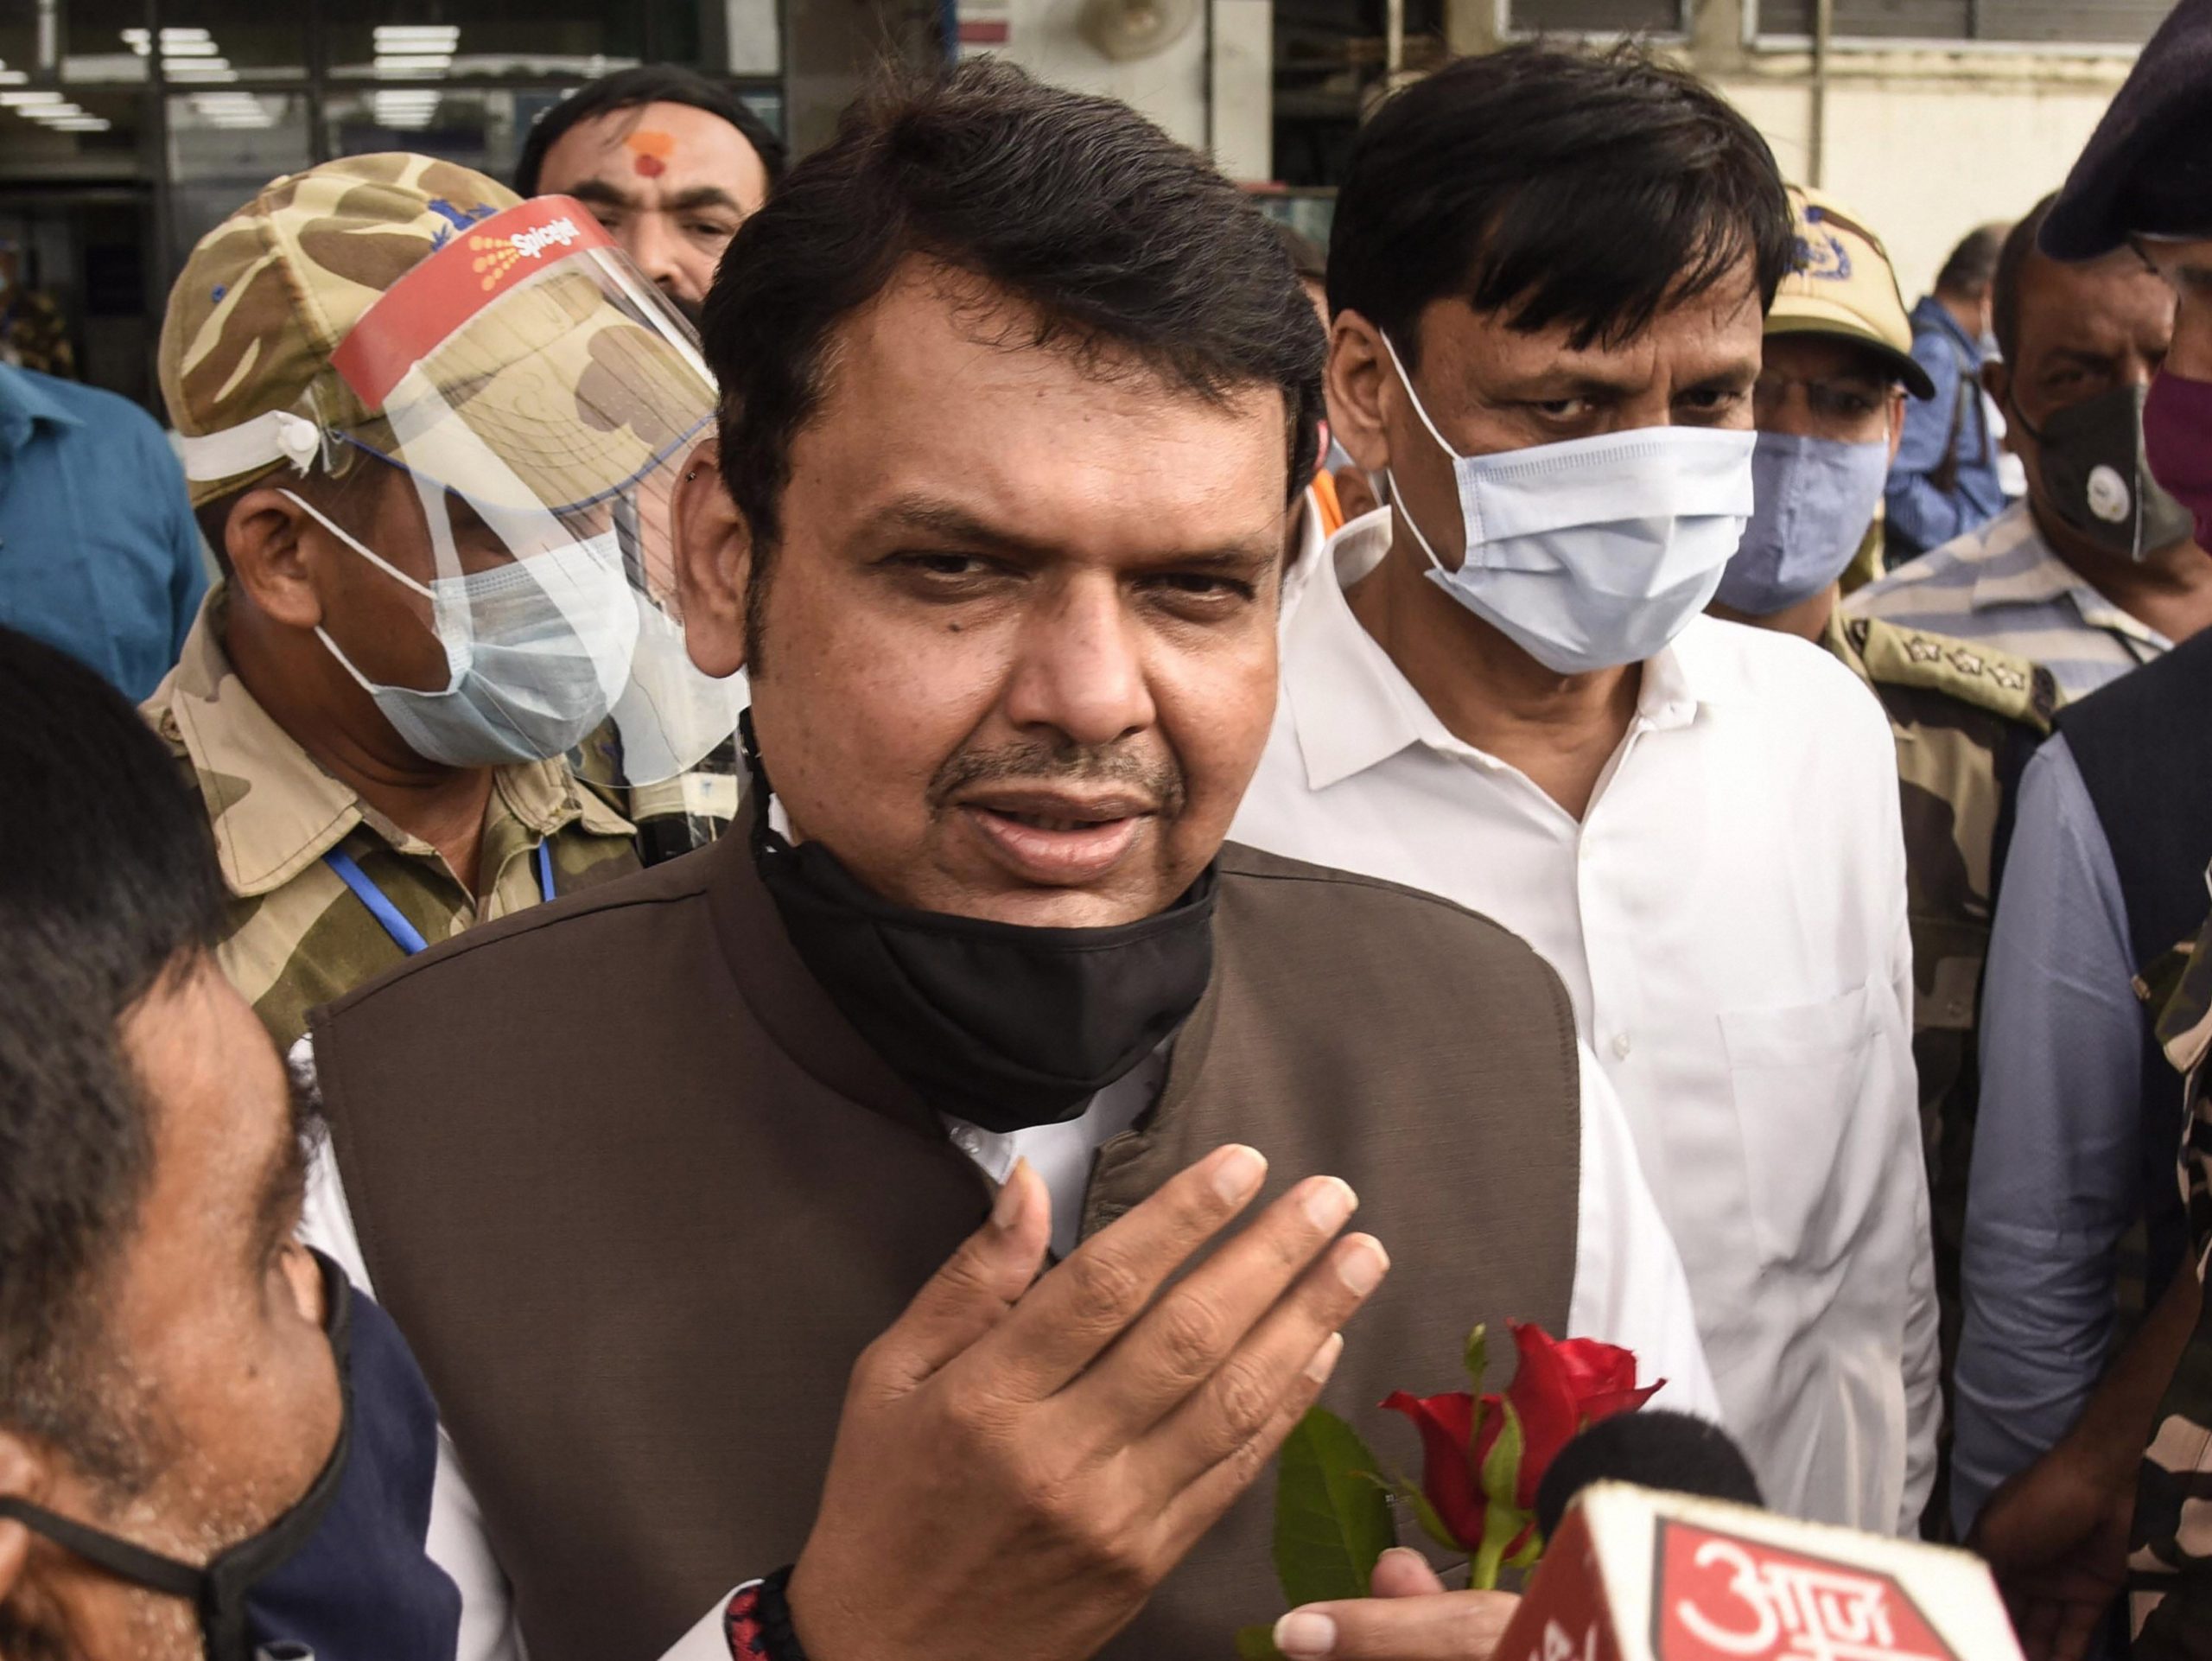 Sweet shop controversy: Karachi to become part of India, says Devendra Fadnavis